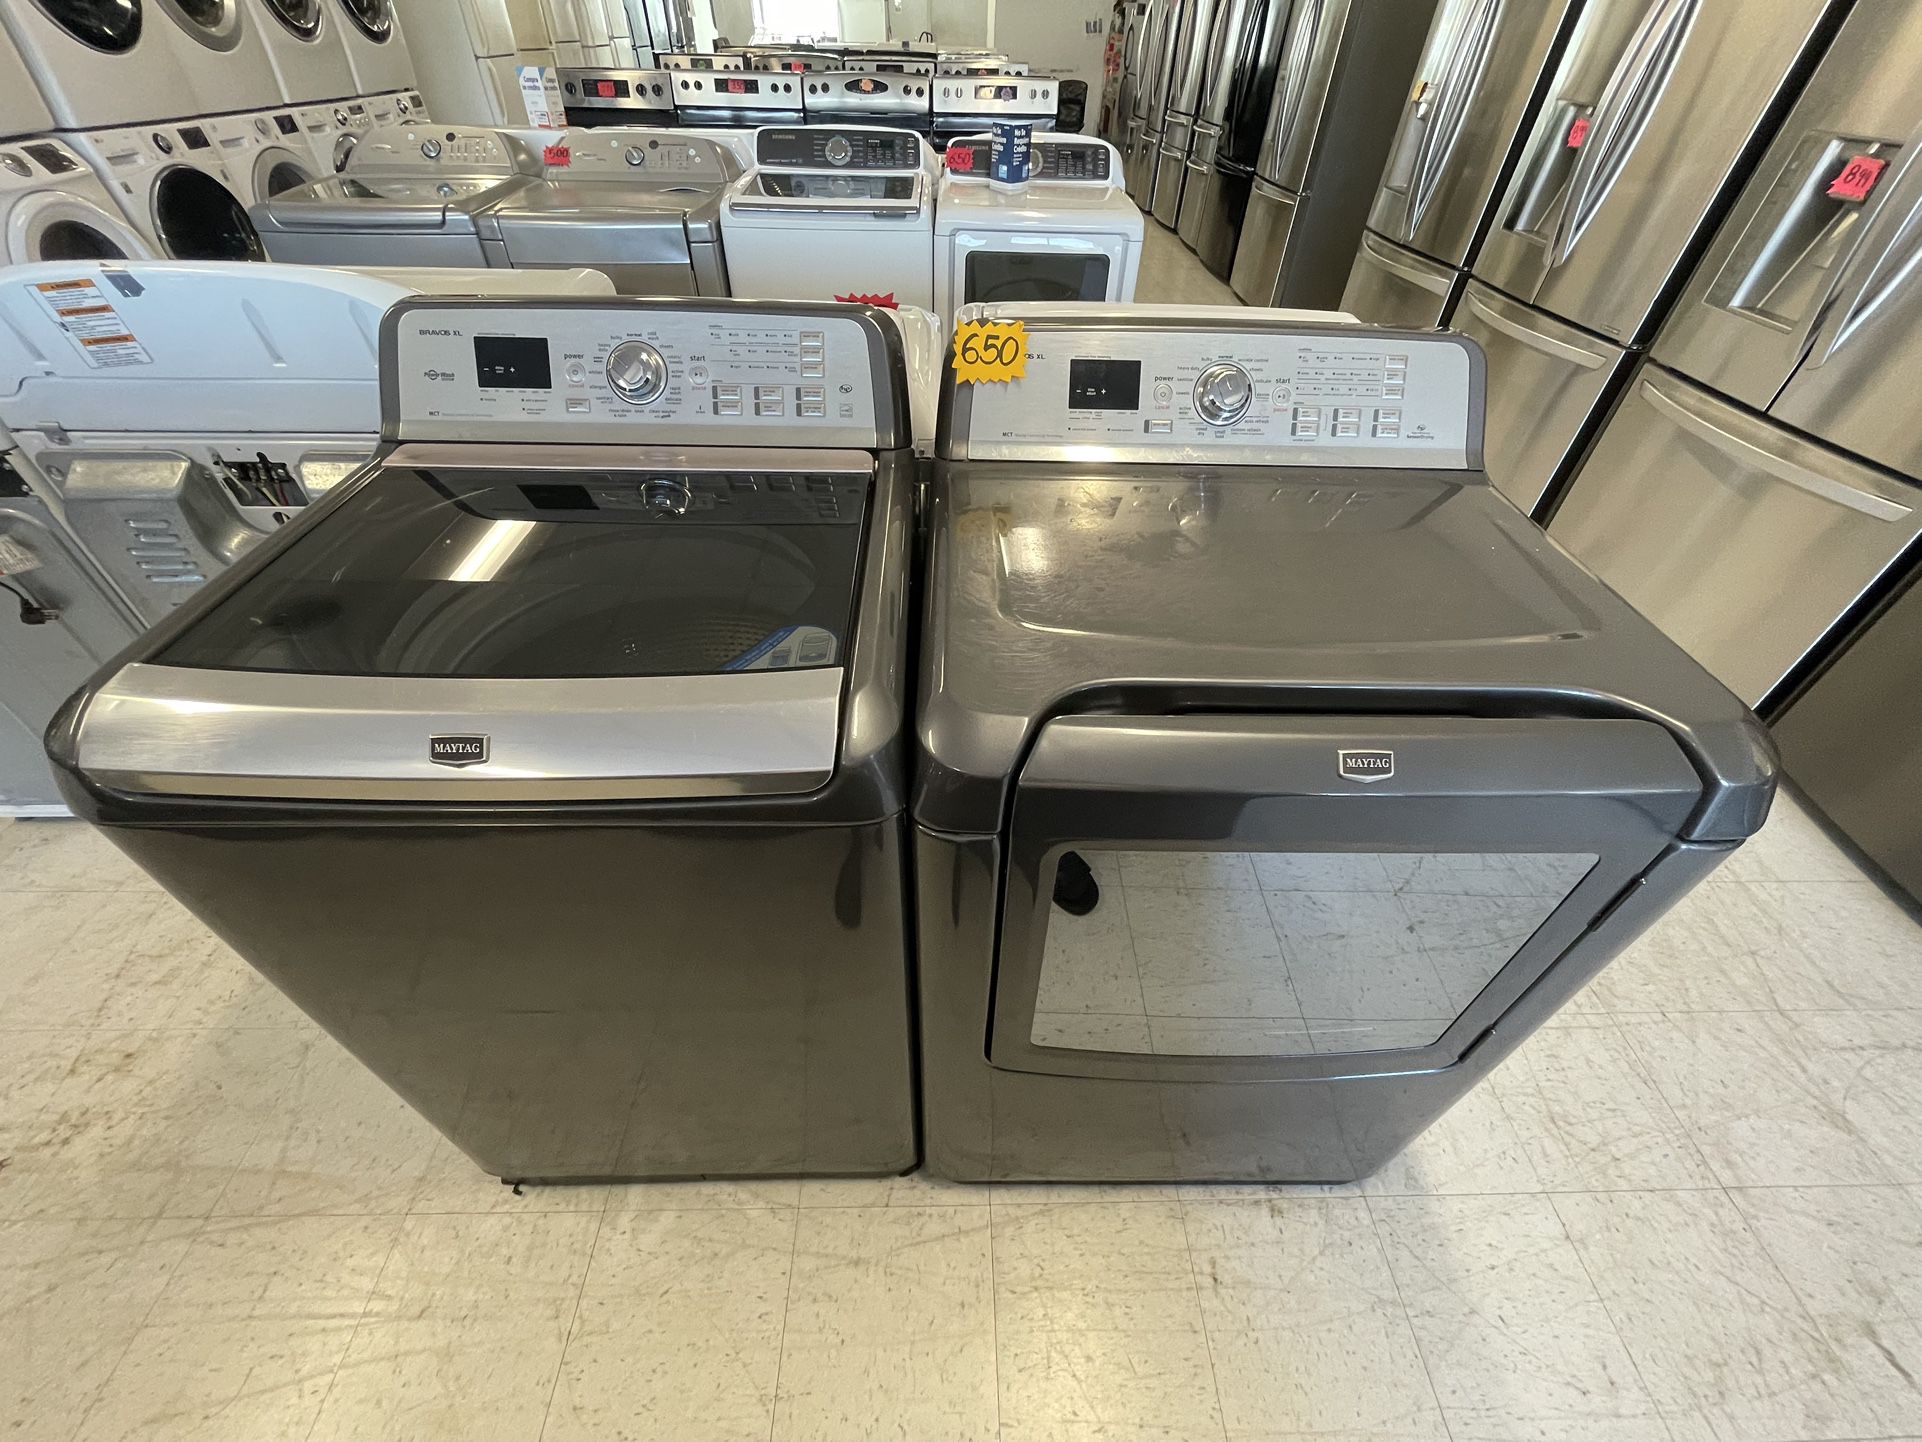 Maytag Tap Load Washer And Electric Dryer Set Used Good Condition With 90days Warranty 